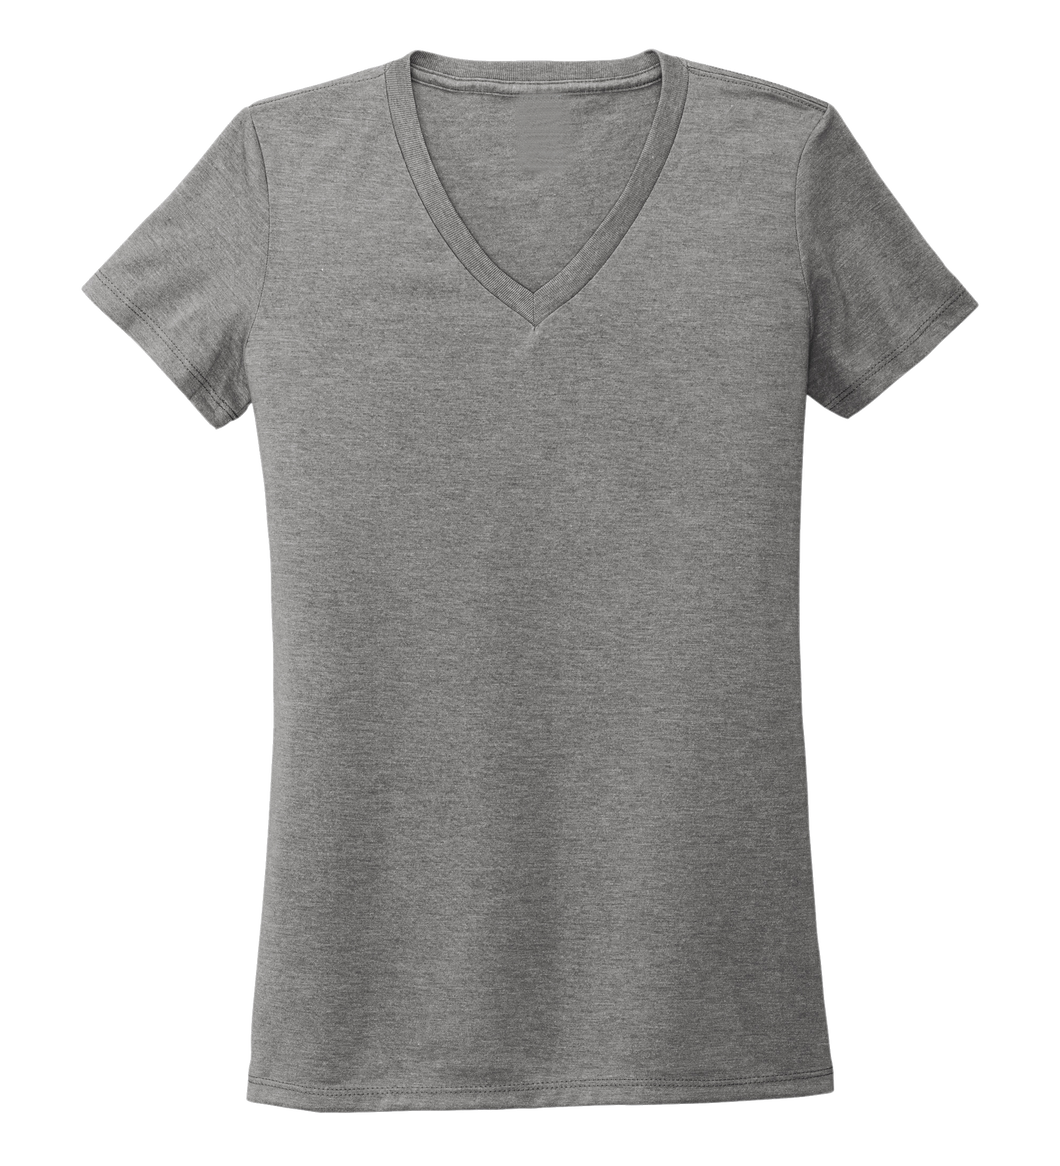 Women's V-neck T-shirt in Oyster Grey